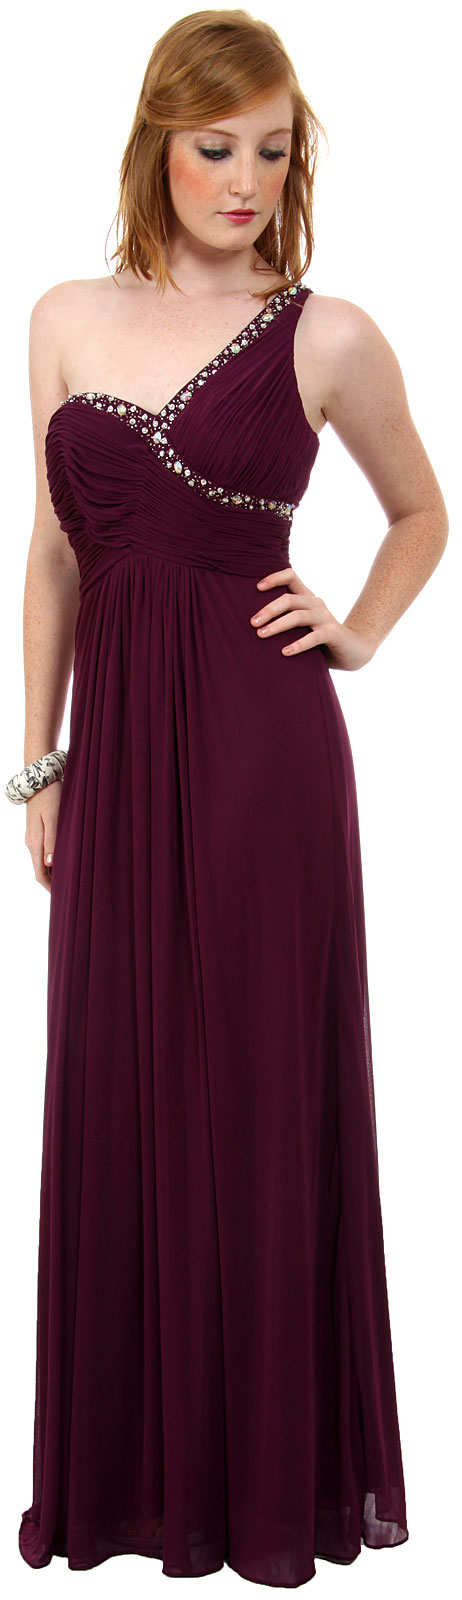 Main image of Greco Roman Formal Prom Dress With Bead Accents